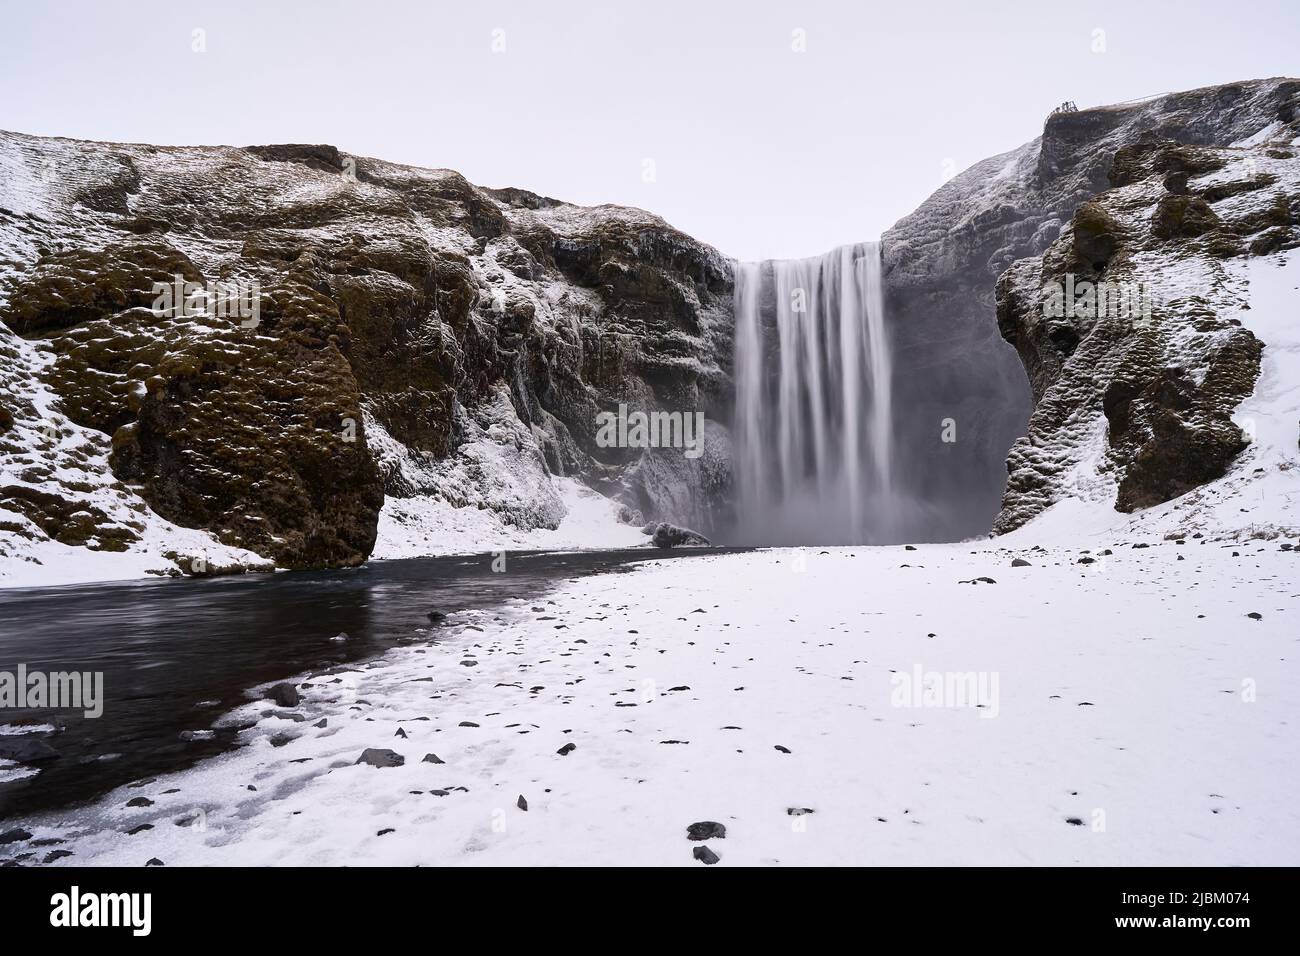 The Skógafoss waterfall in Iceland during winter Stock Photo